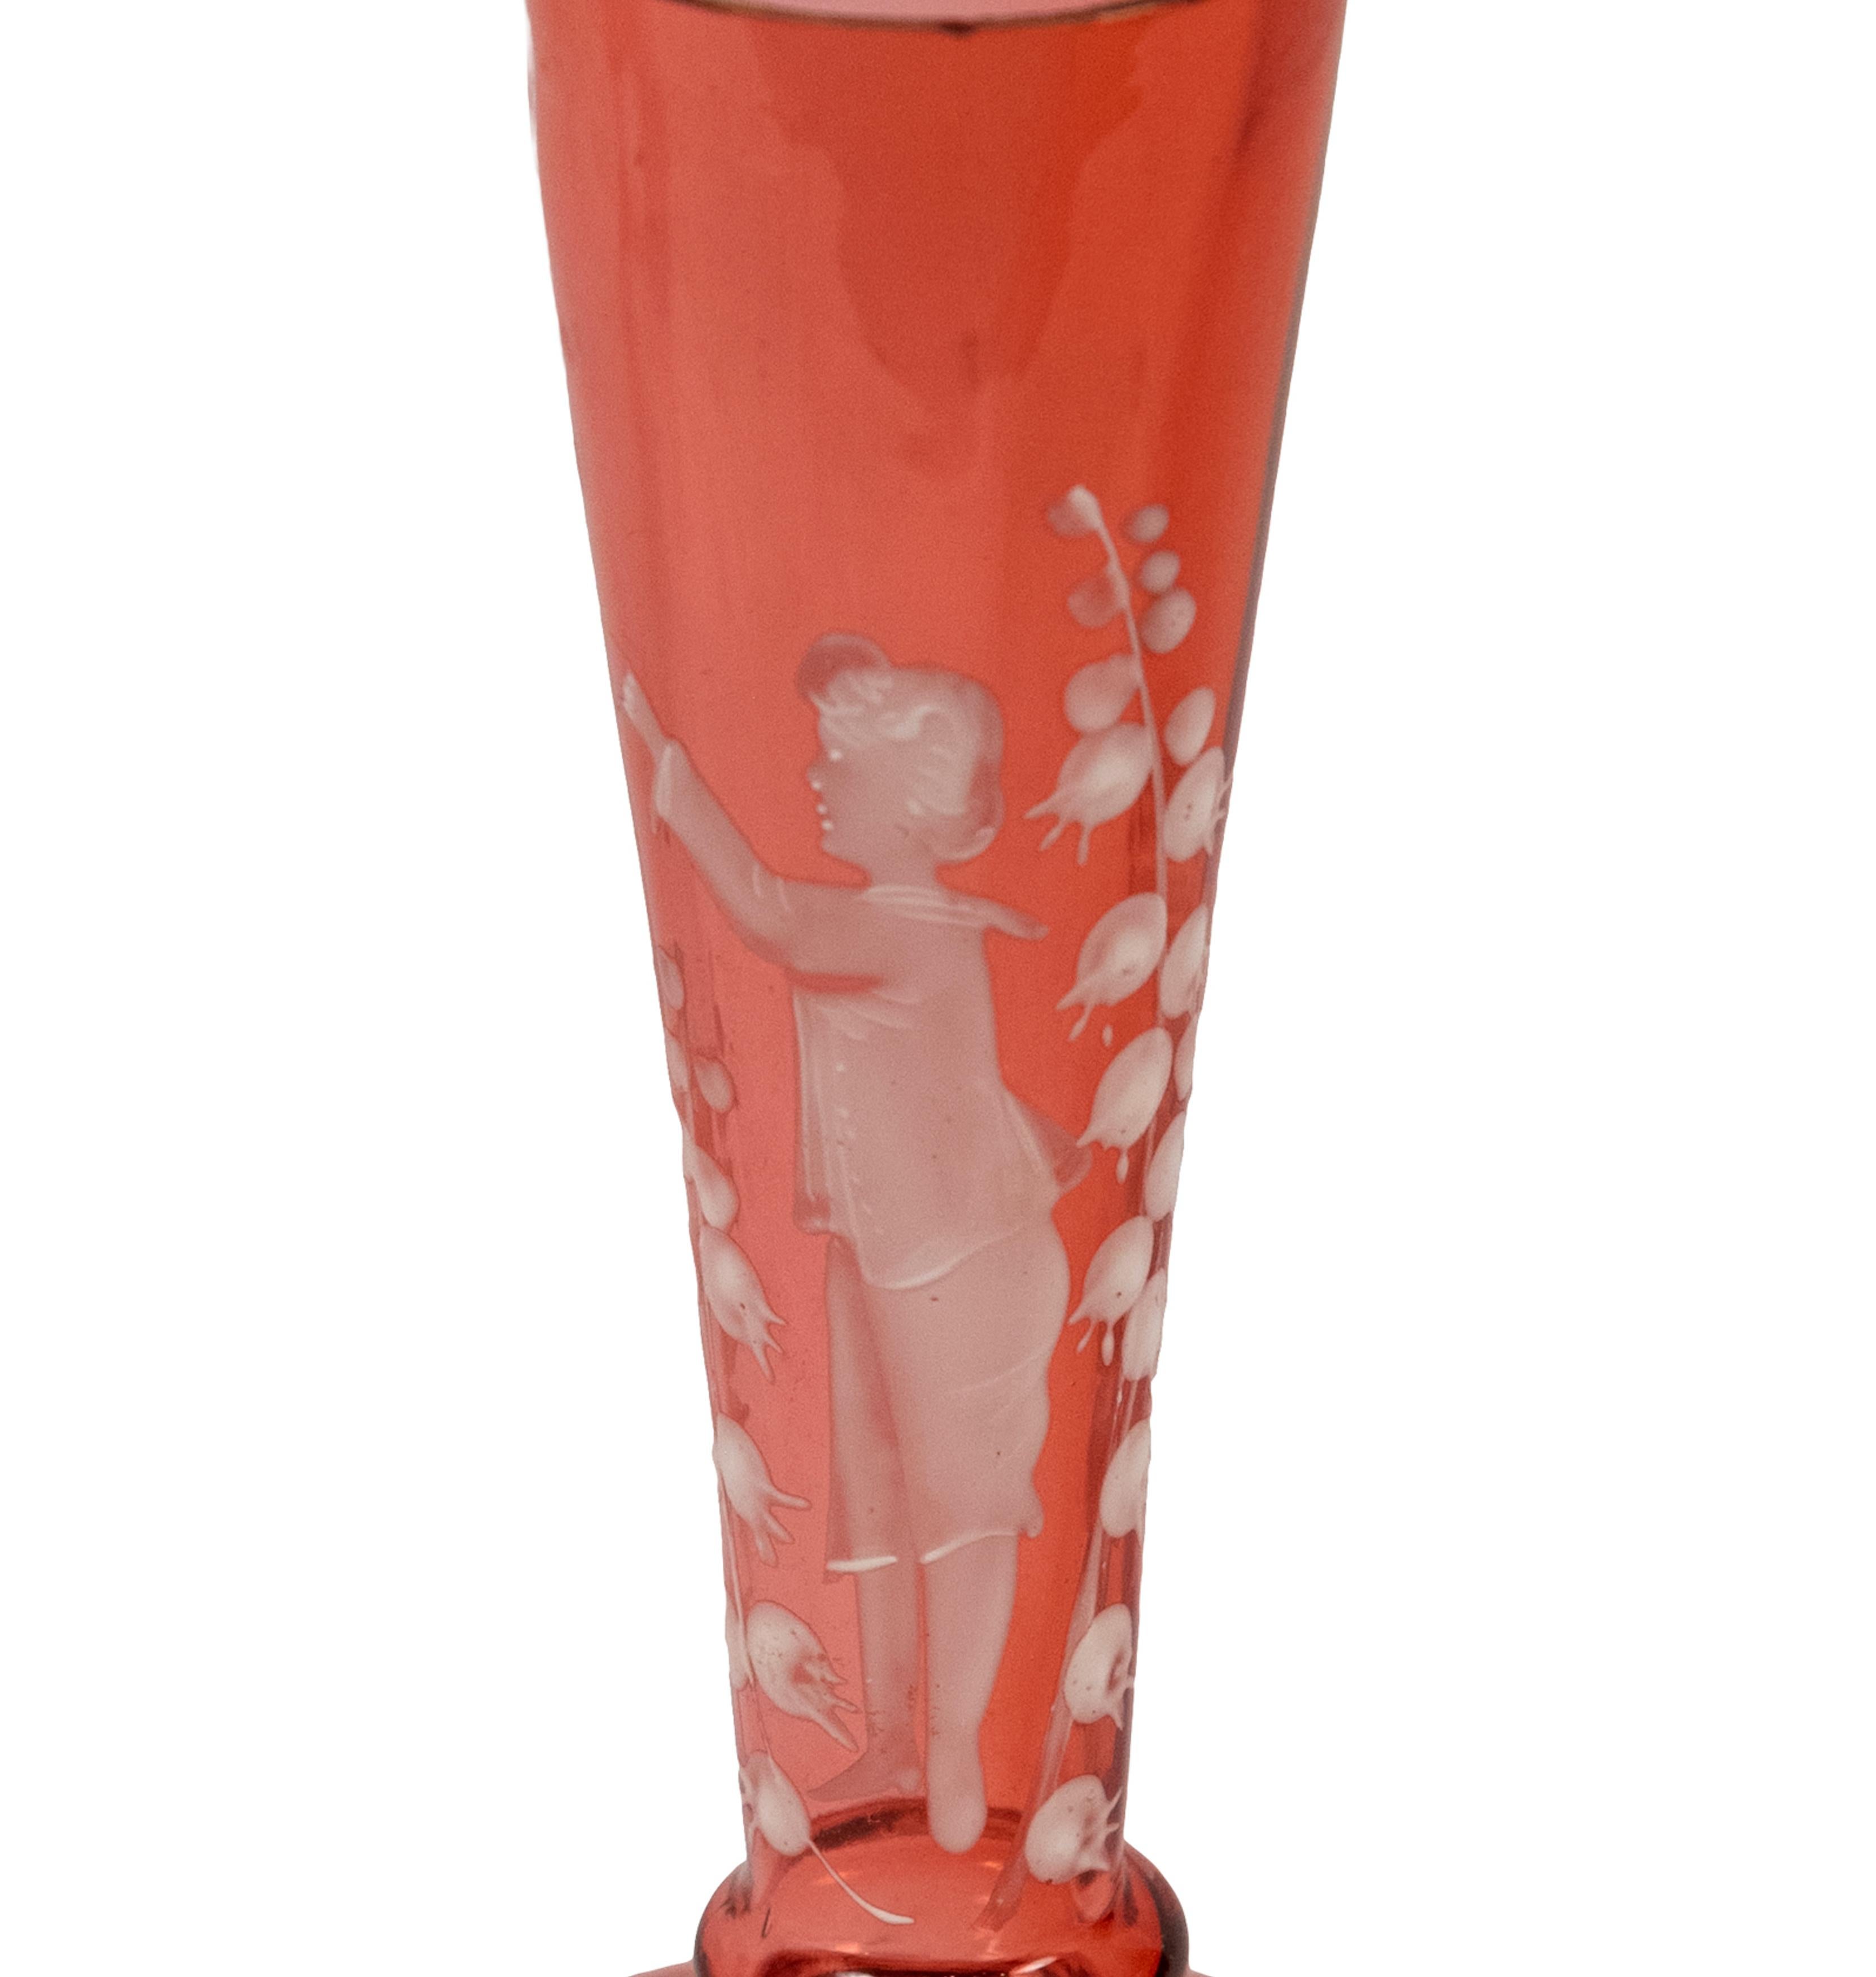 Mary Gregory cranberry-colored bud vase with white enamel decoration of a young boy surrounded by vines.